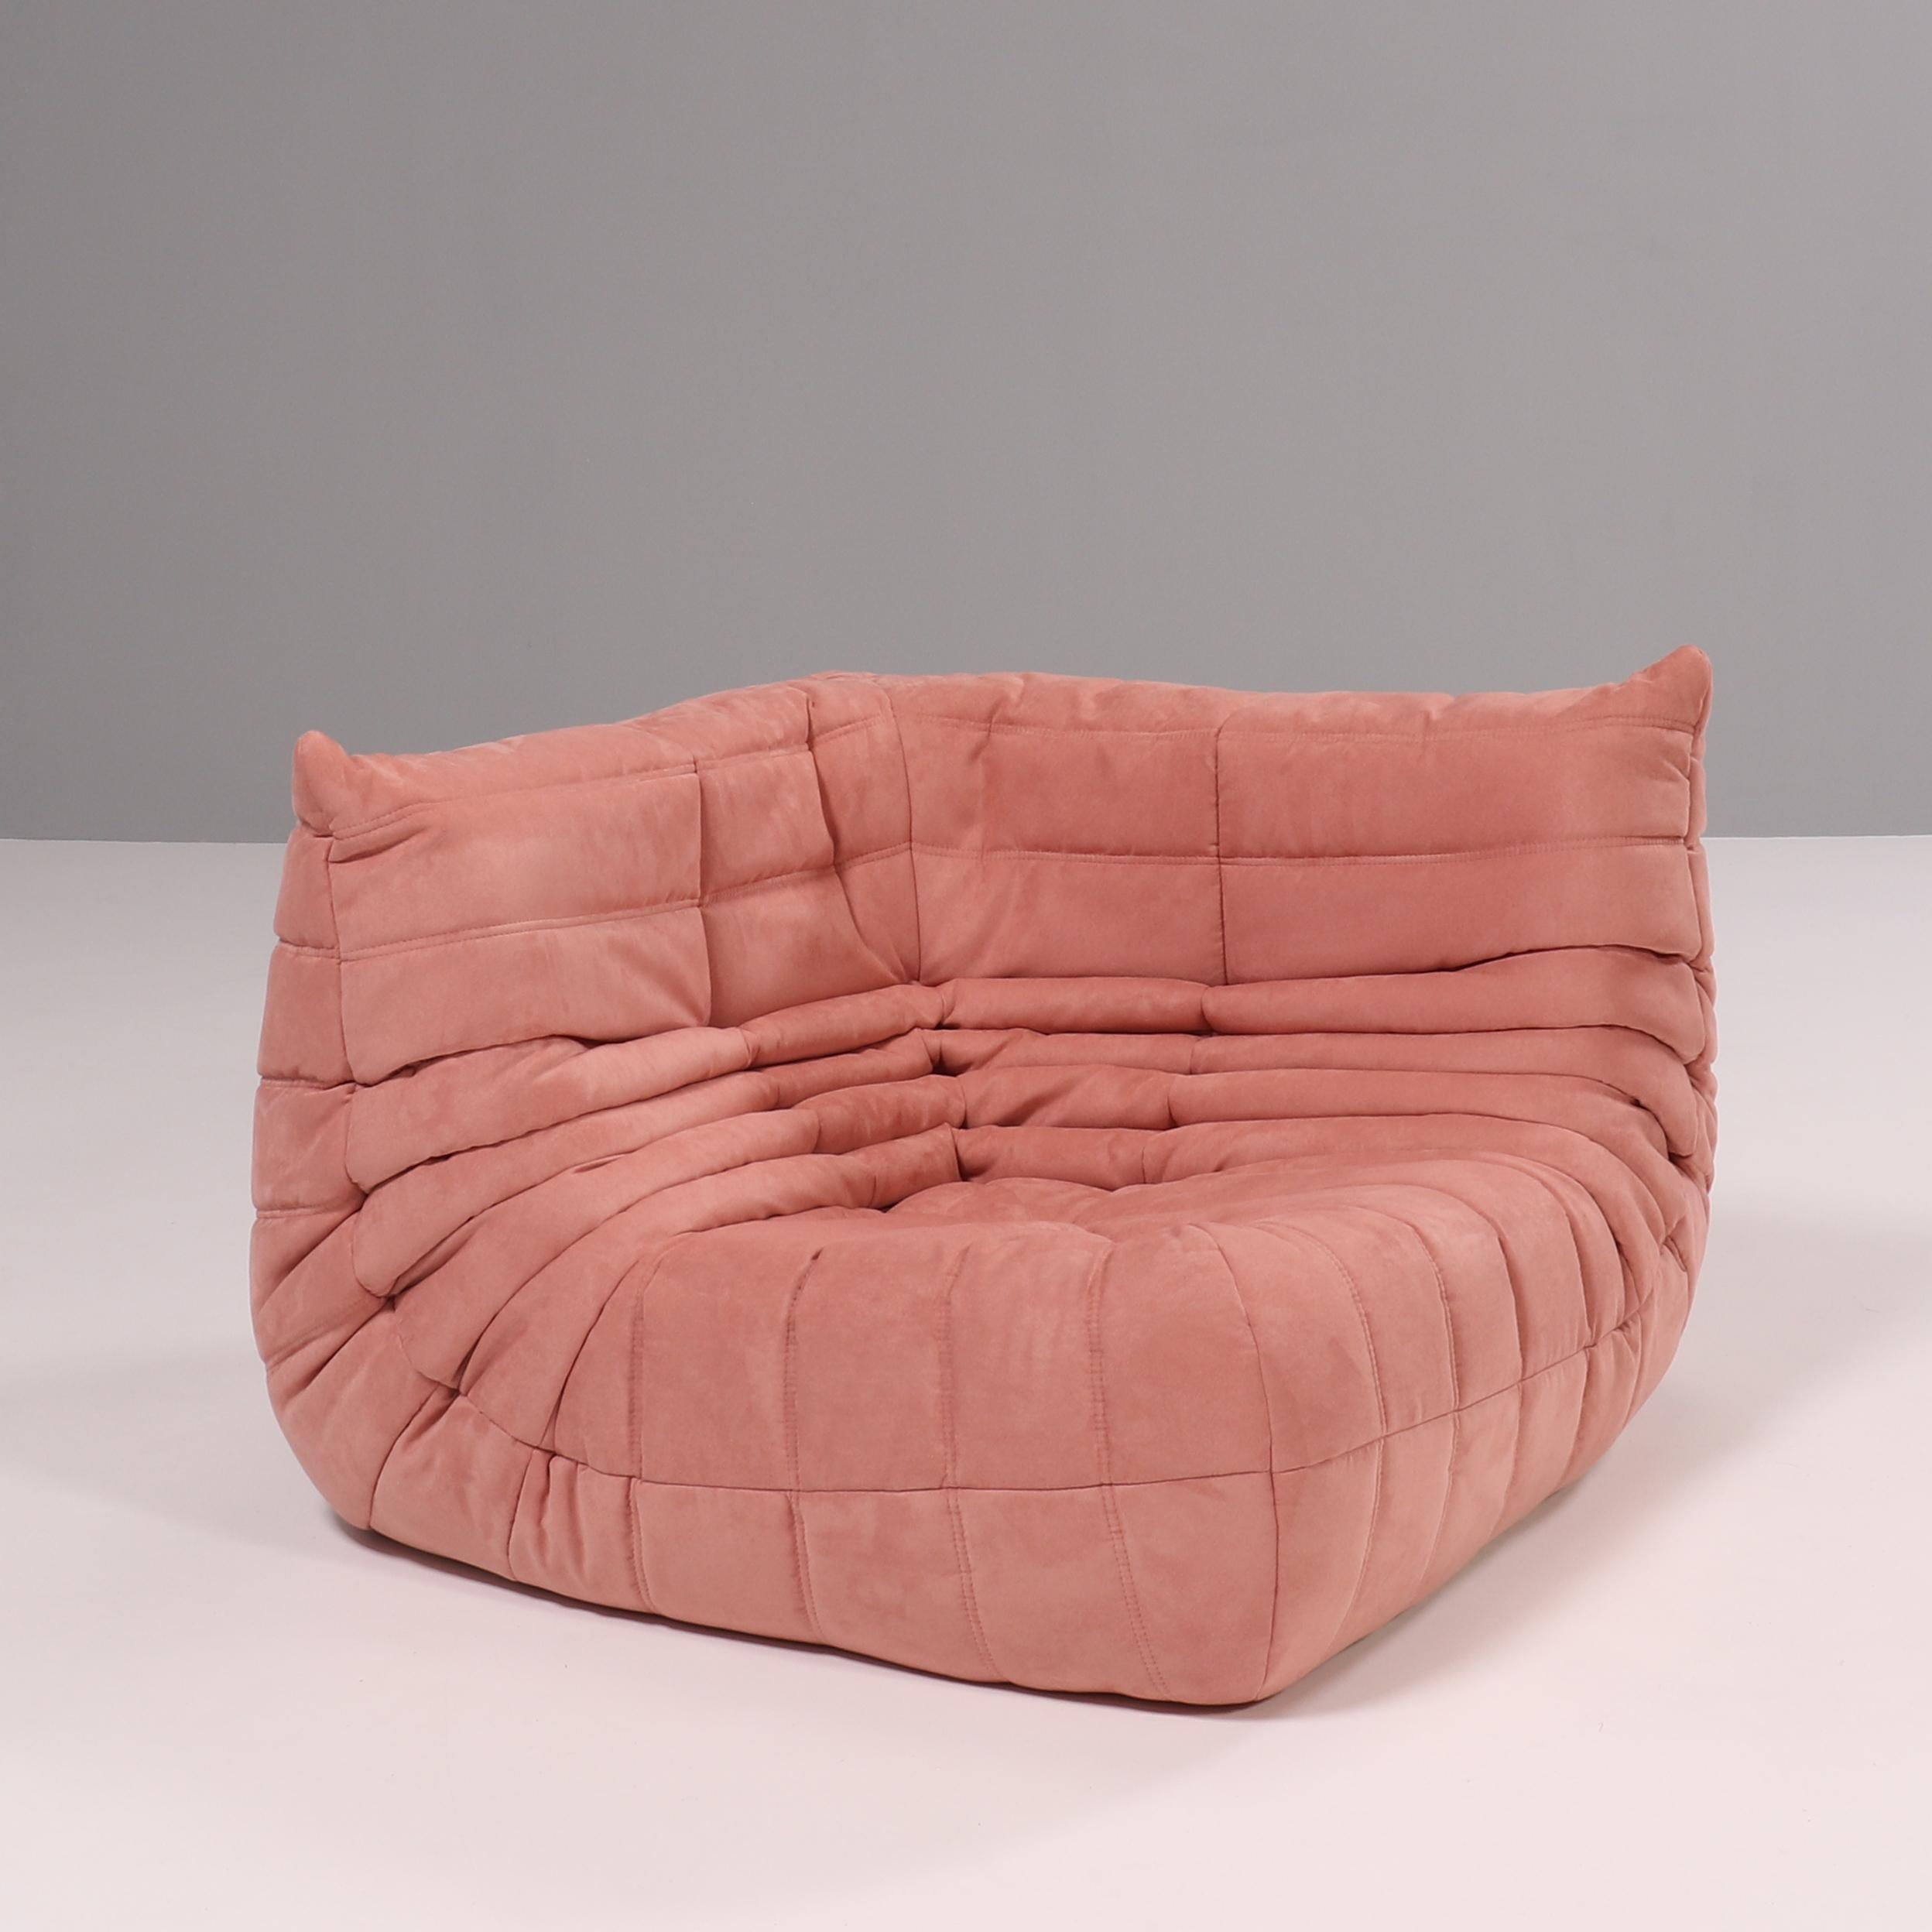 Fabric Ligne Roset by Michel Ducaroy Togo Pink Modular Sofa and Footstool, Set of 5